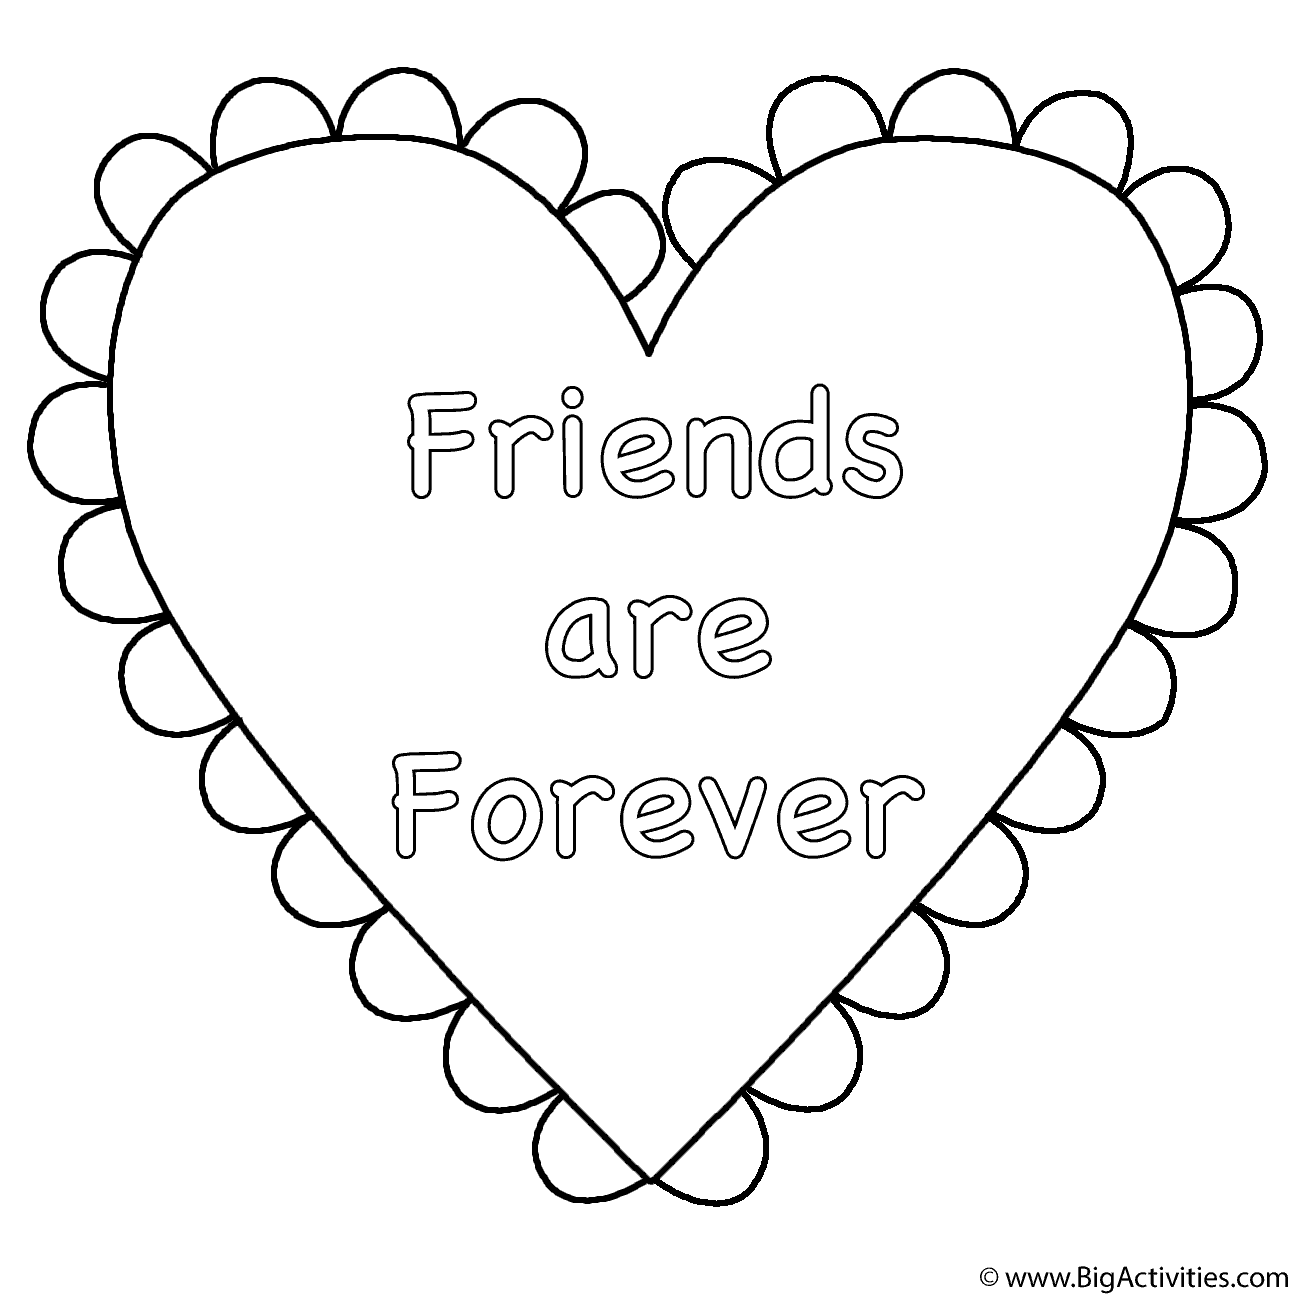 Heart friends are forever